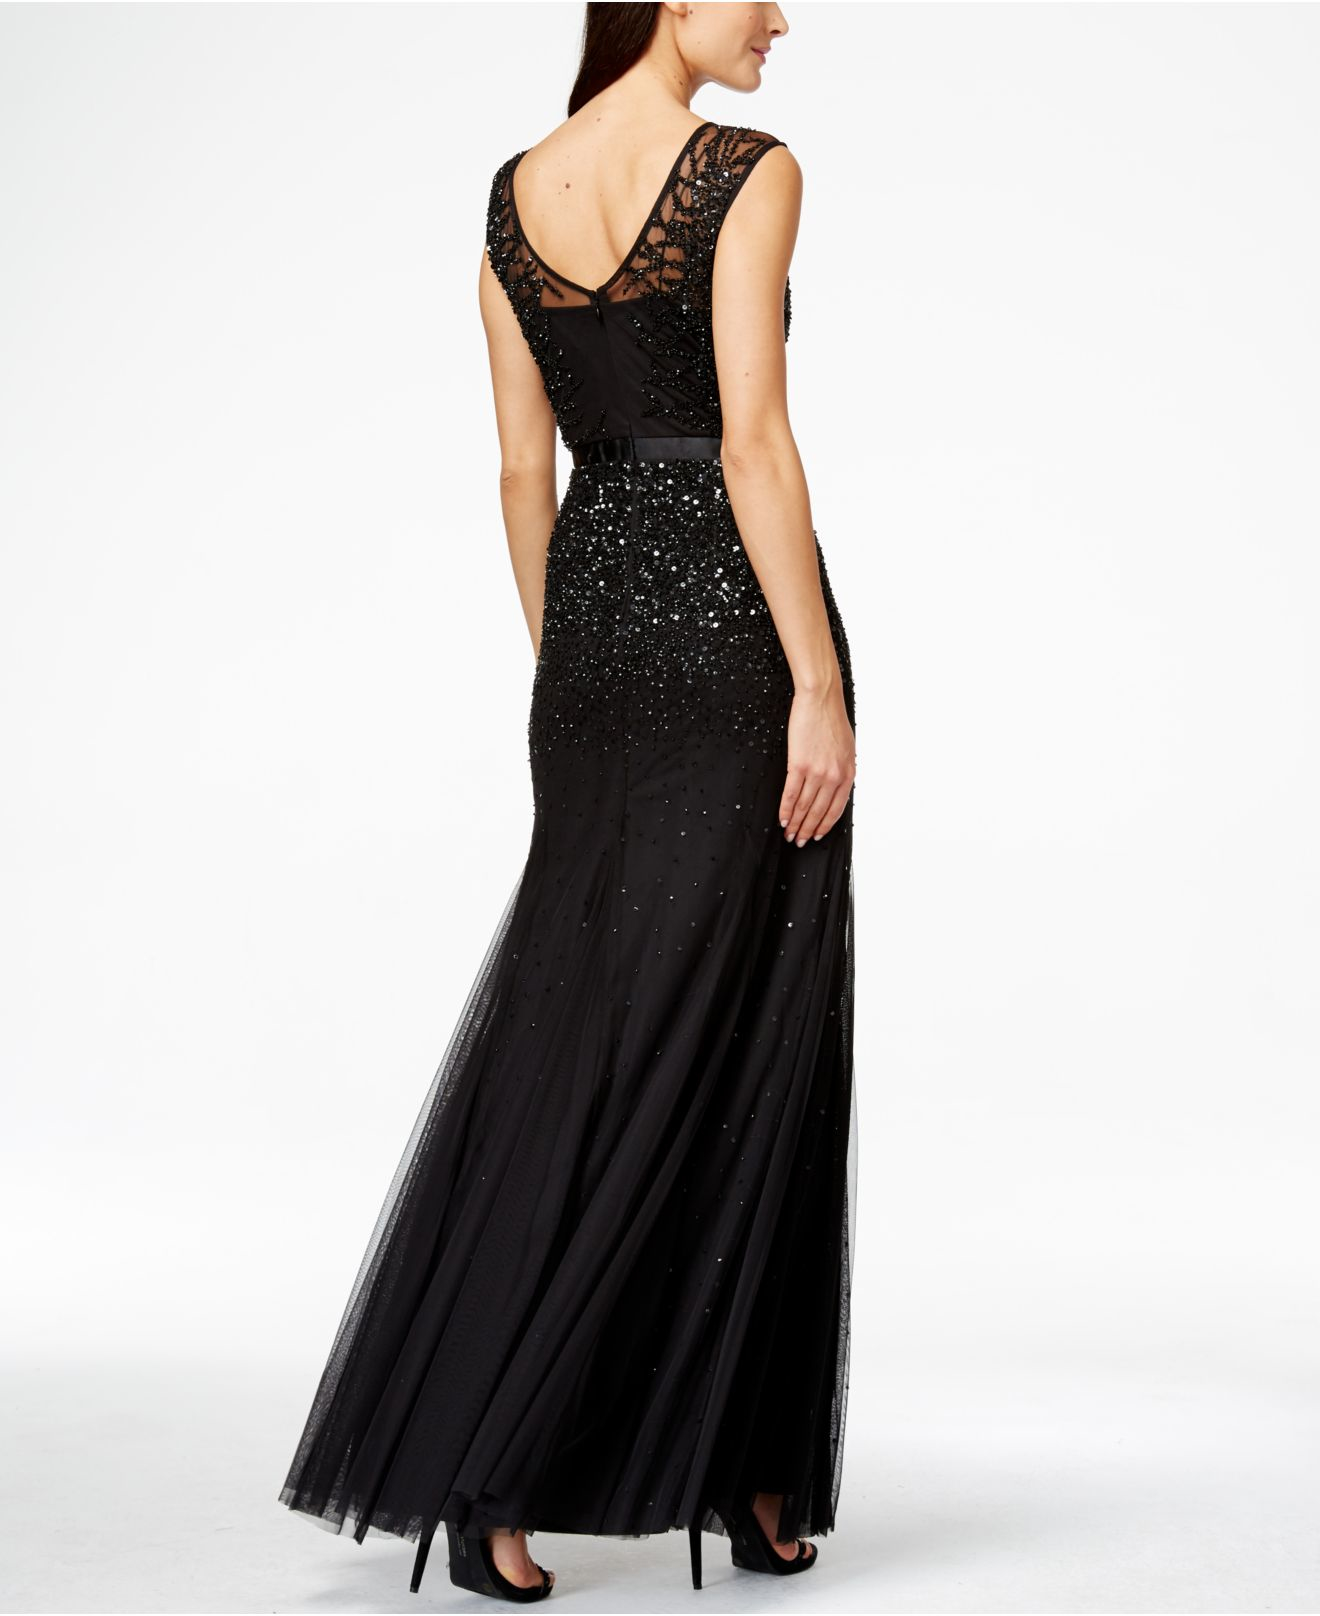 Adrianna Papell Synthetic Sleeveless Beaded Illusion Gown in Black - Lyst